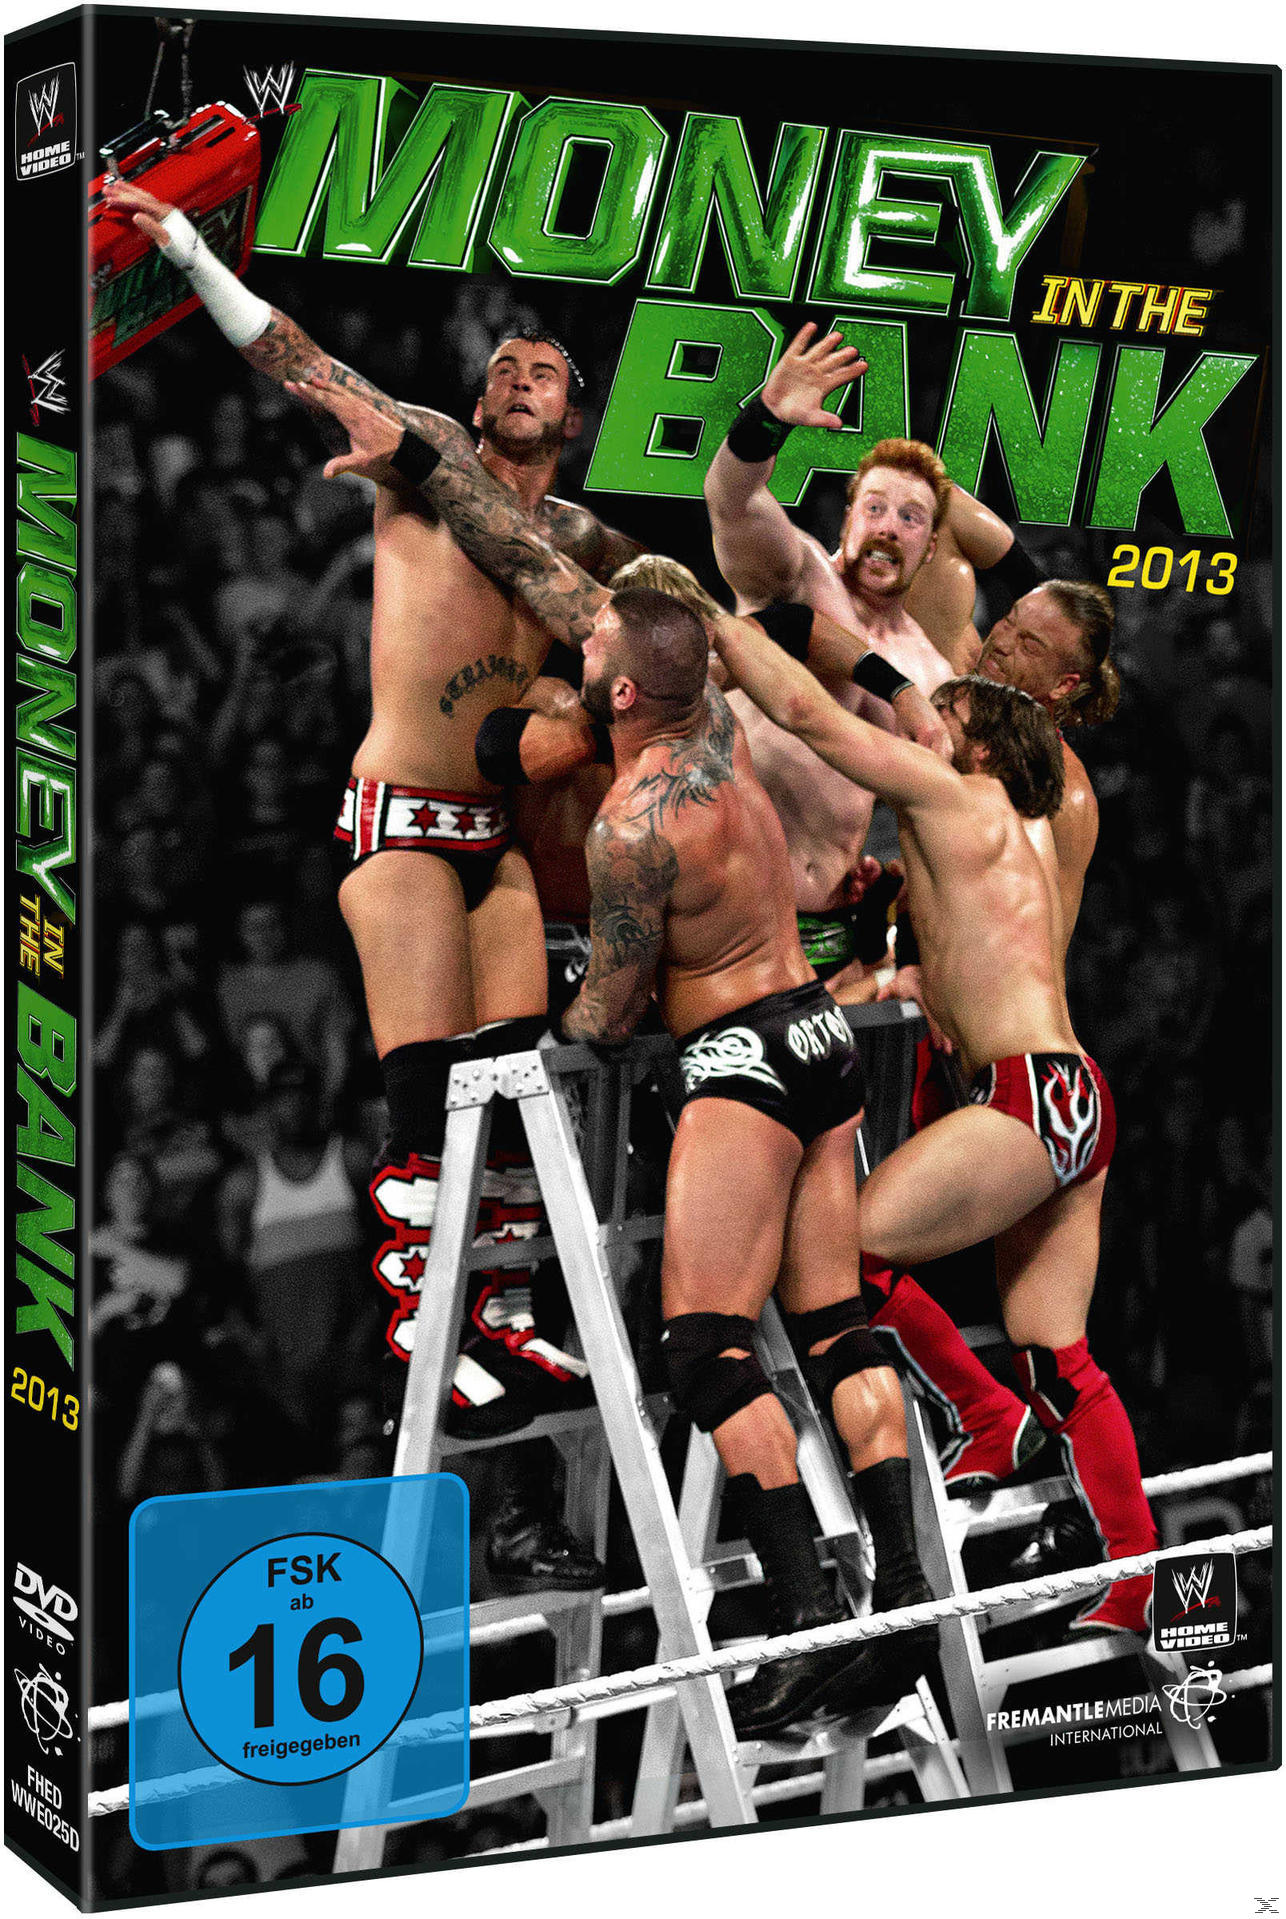 2013 DVD the Money in Bank